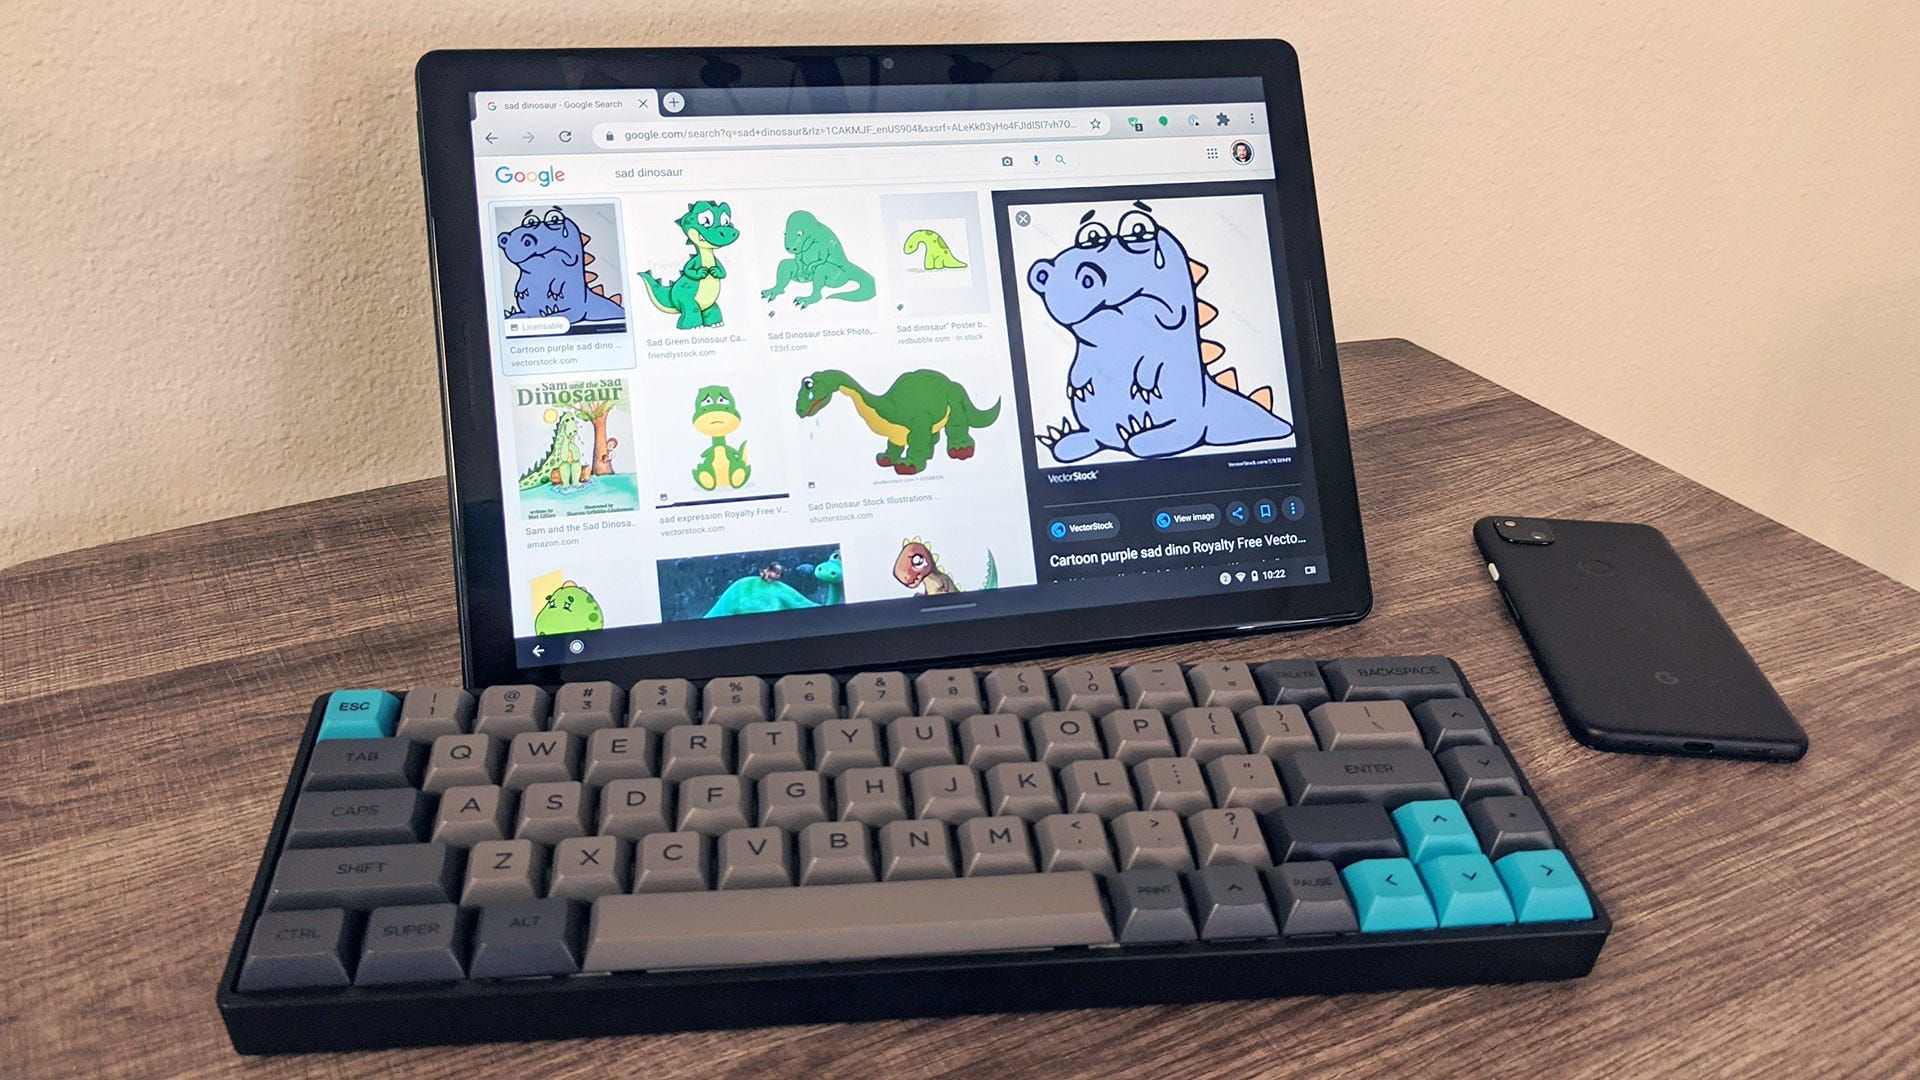 The Pixel Slate tablet with a Pixel smartphone and mechanical keyboard.